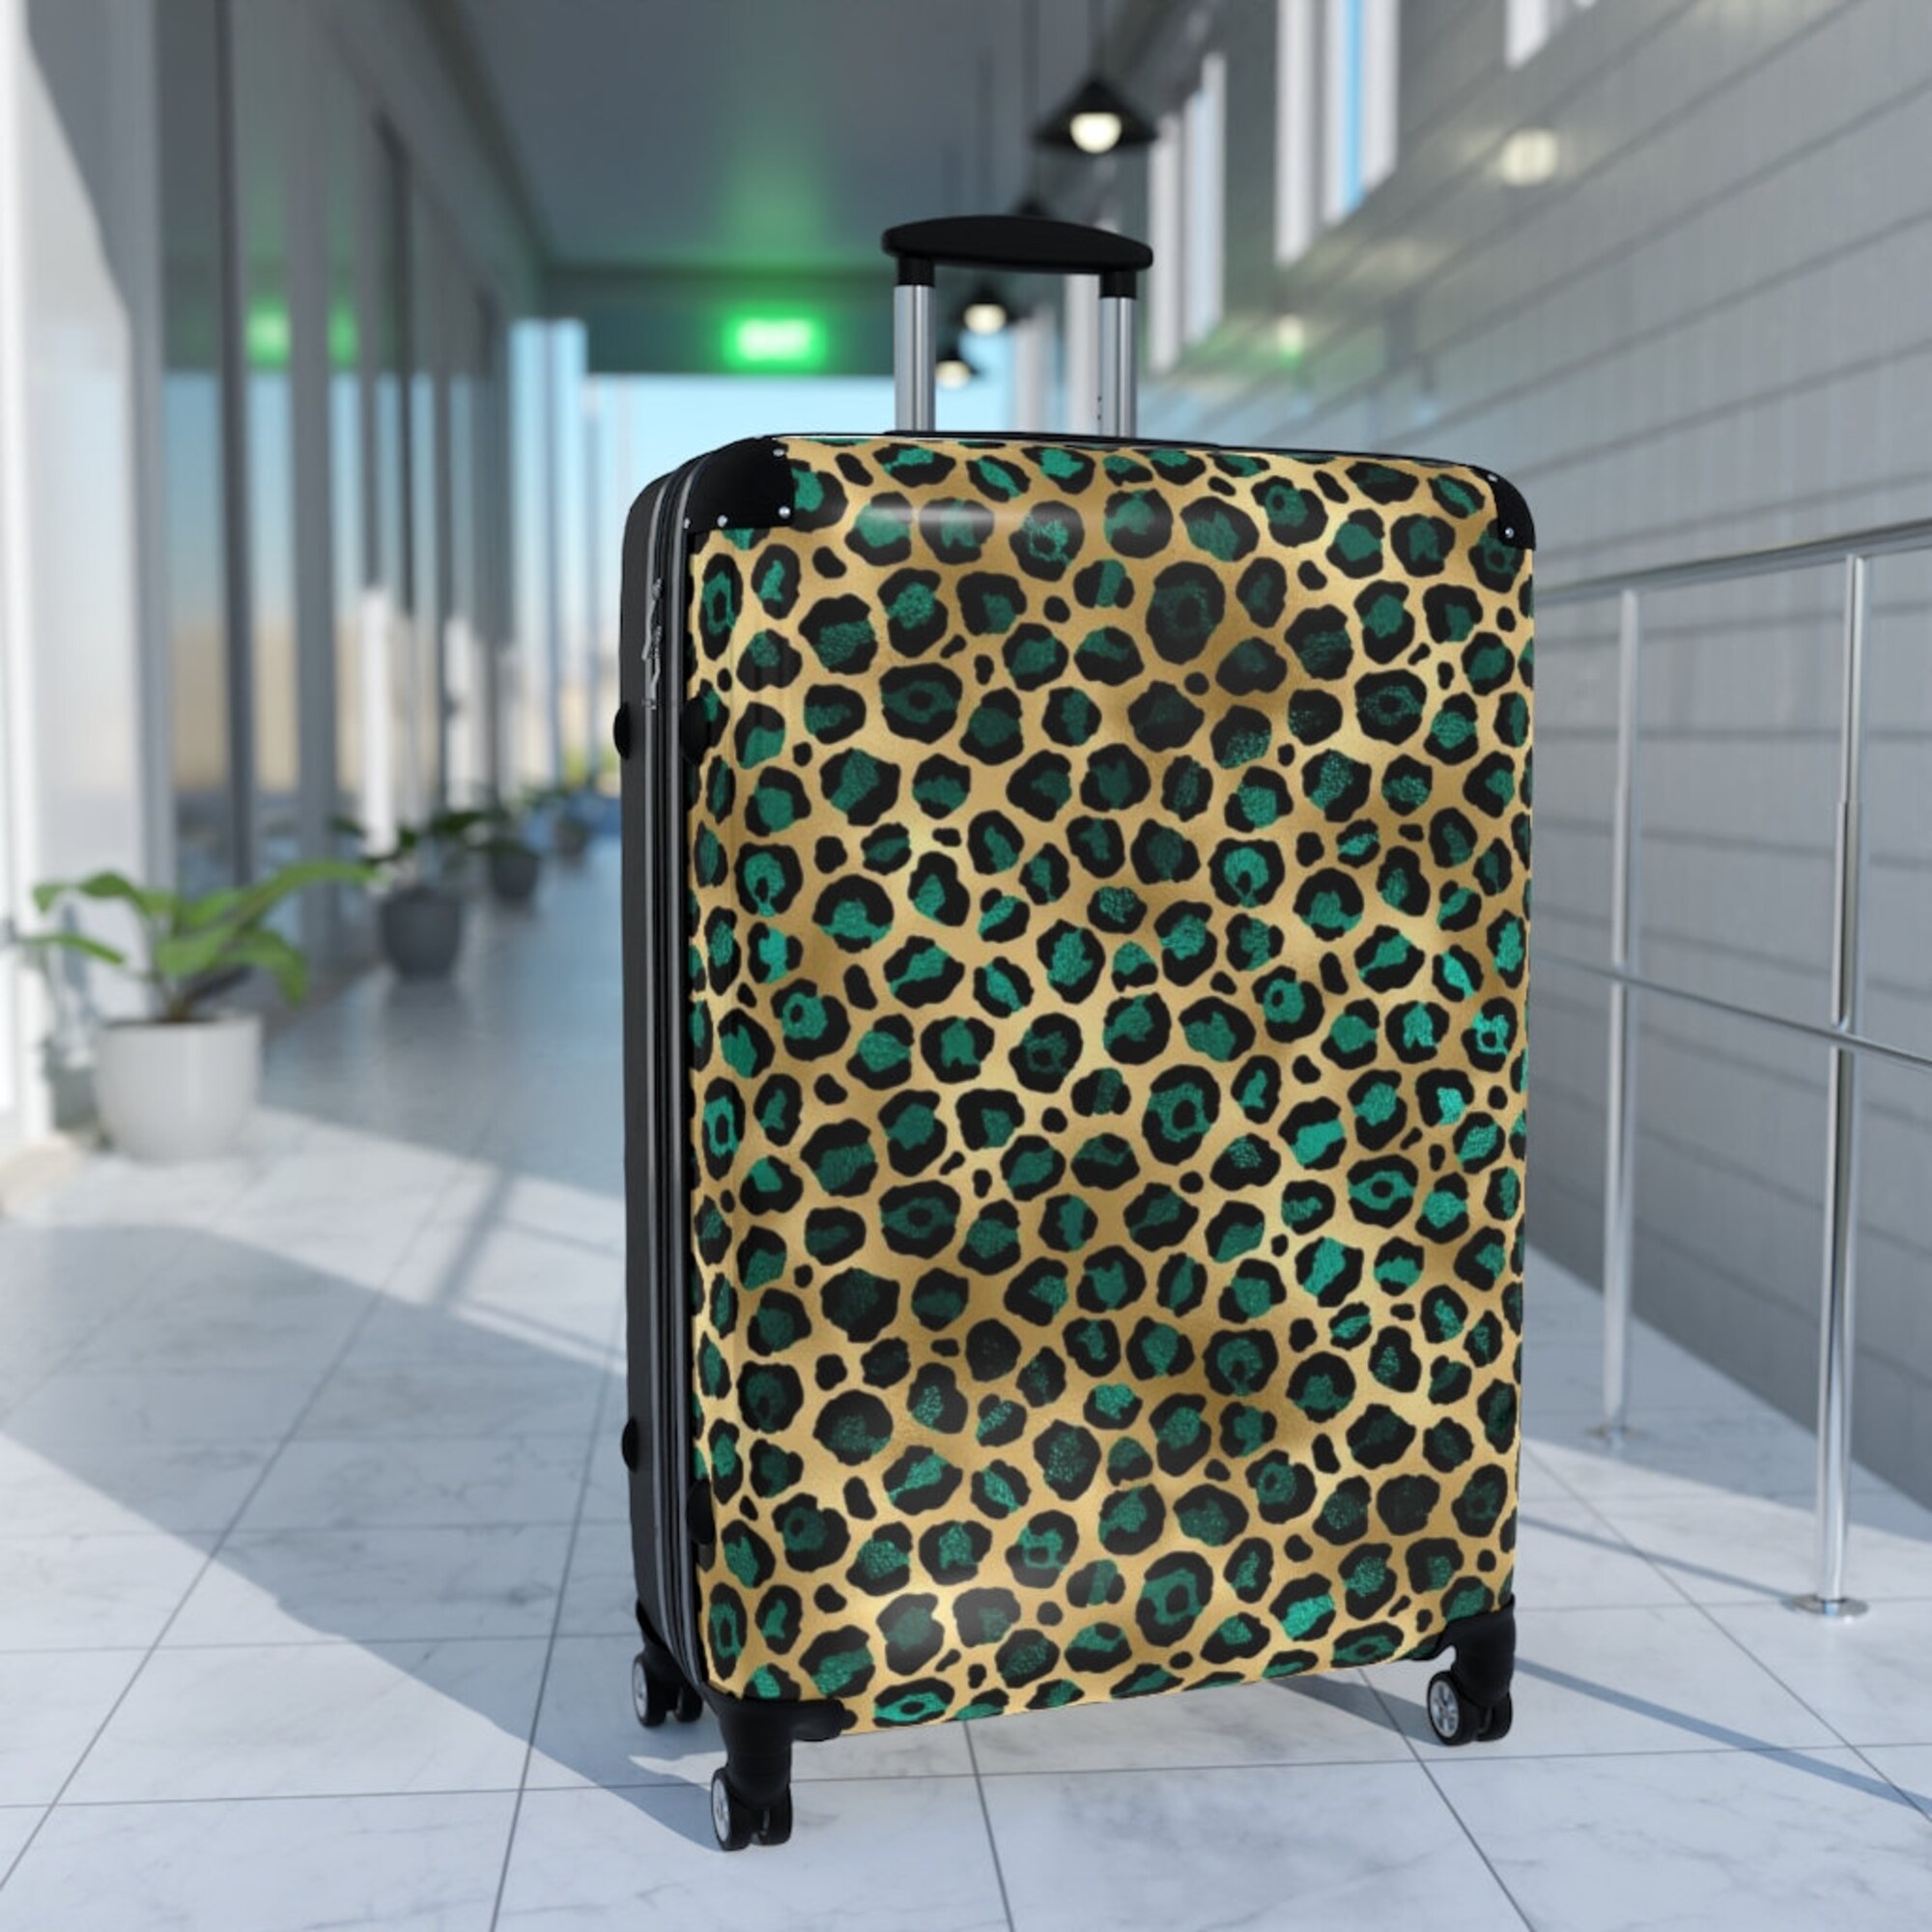 The Green & Gold Leopard Suitcase